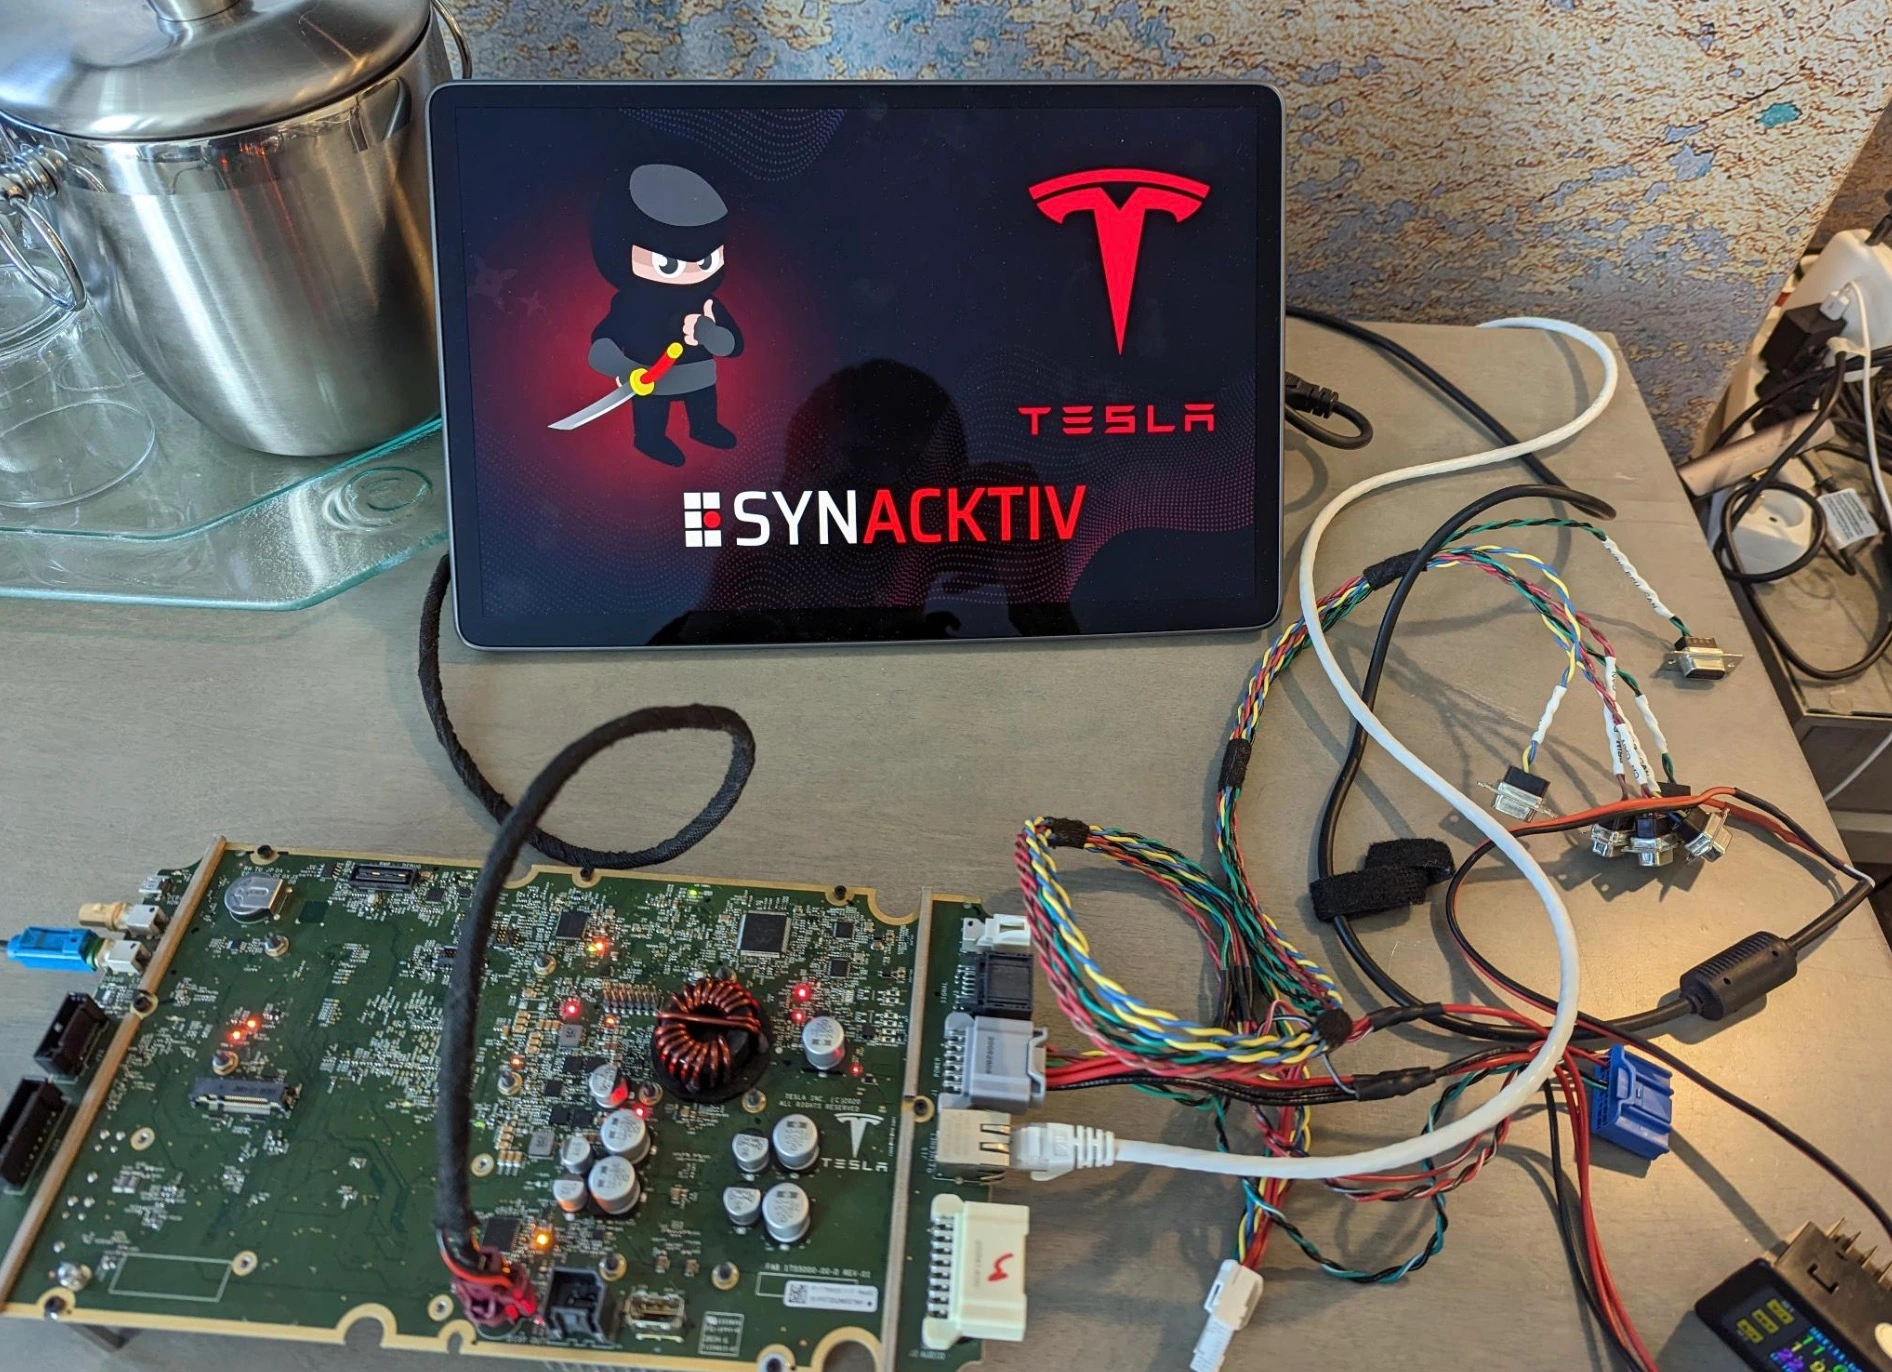 Hackers received $100,000 and a Tesla Model 3 electric car for two Tesla security hacks